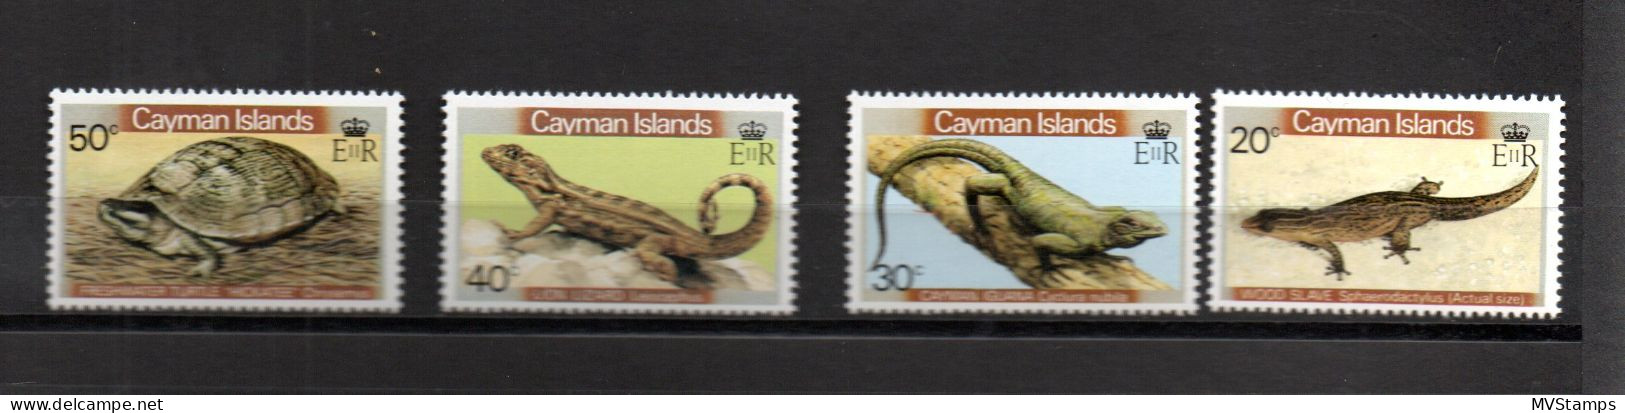 Cayman Islands 1981 Old Set Turtle/lizard Stamps (Michel 471/74) Nice MNH - Cayman (Isole)